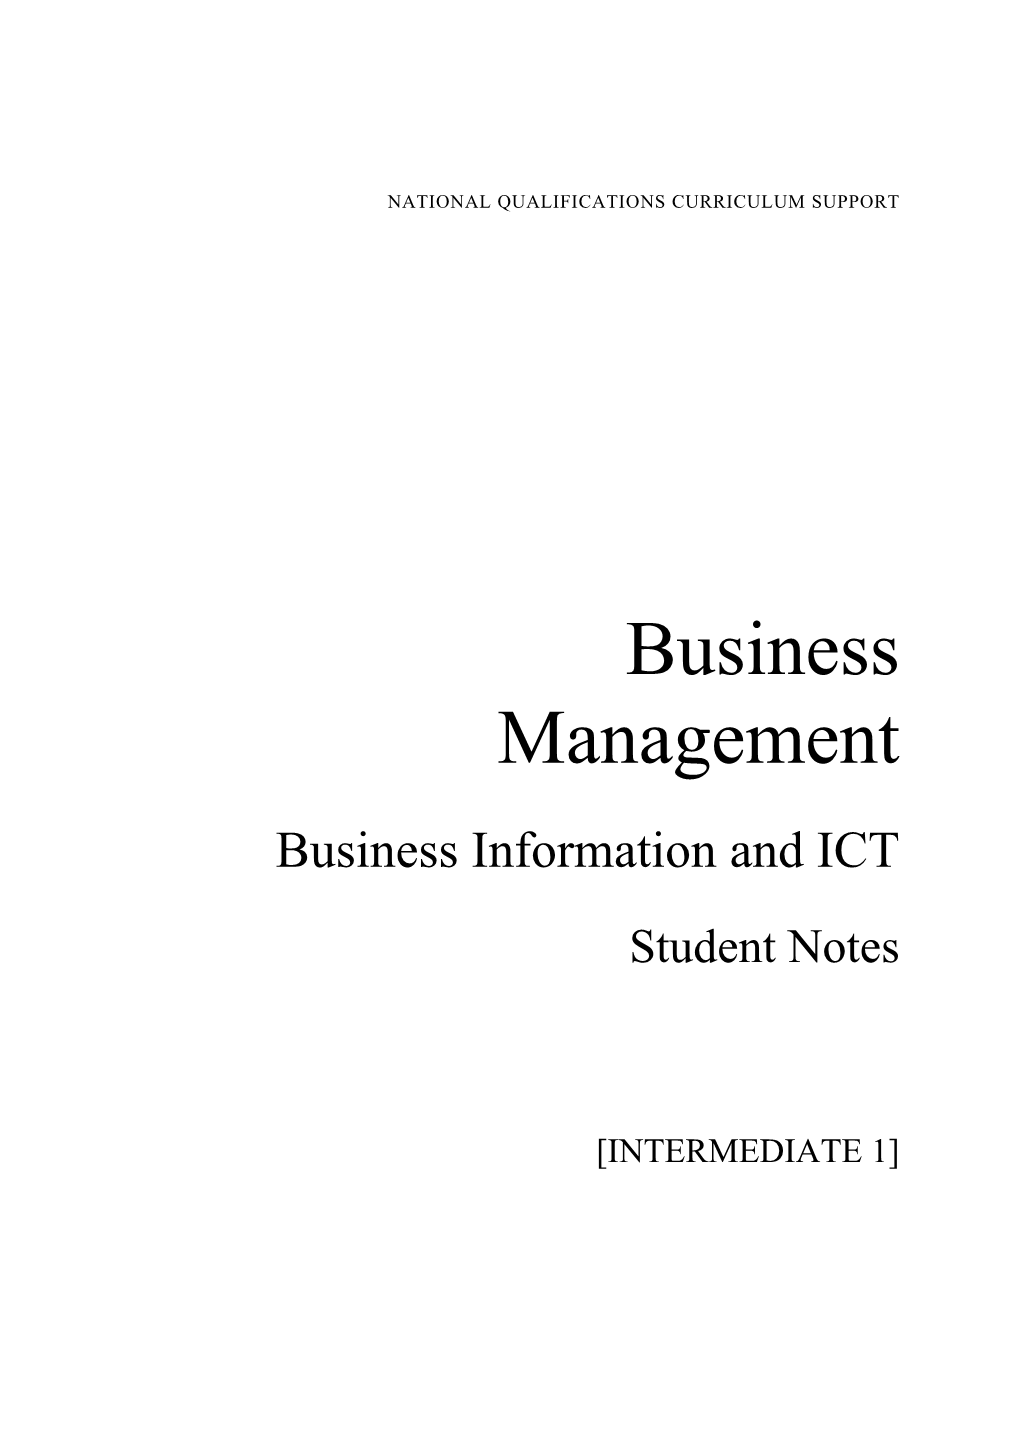 Business Management: Business Information and ICT - Student Notes for Intermediate 1